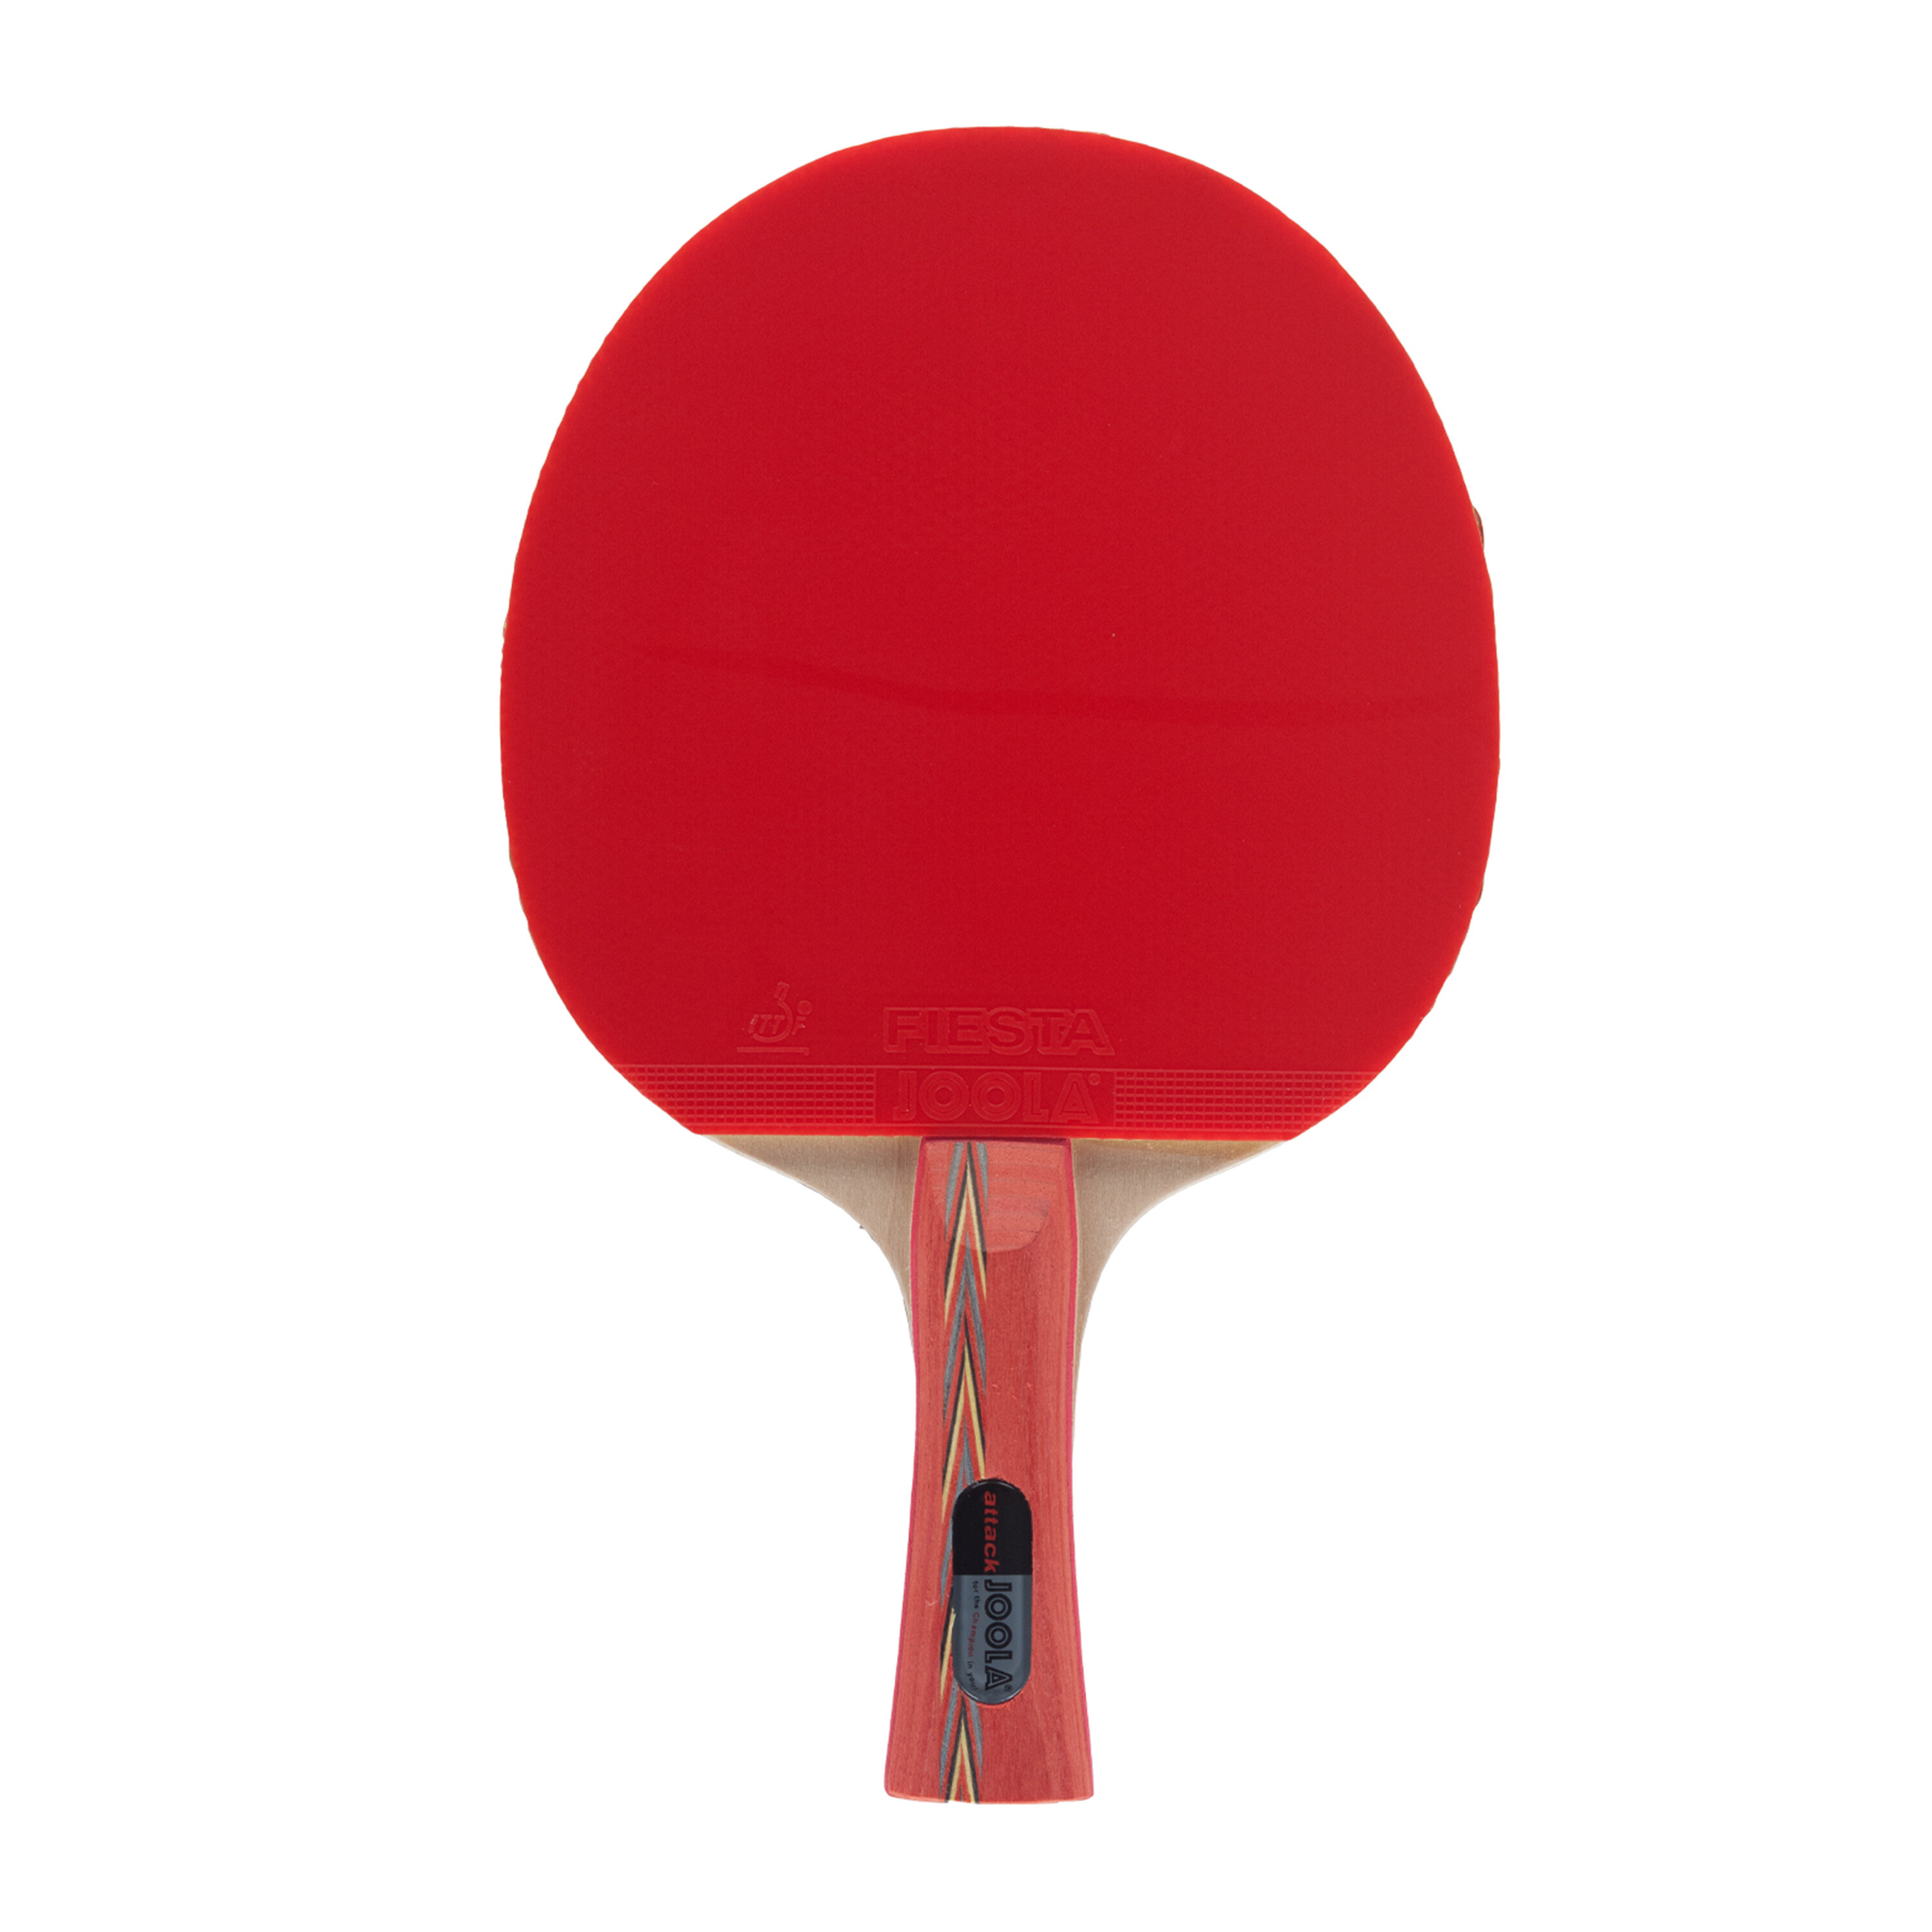 JOOLA Attack Table Tennis Racket - Ping Pong Paddle with Power Grip